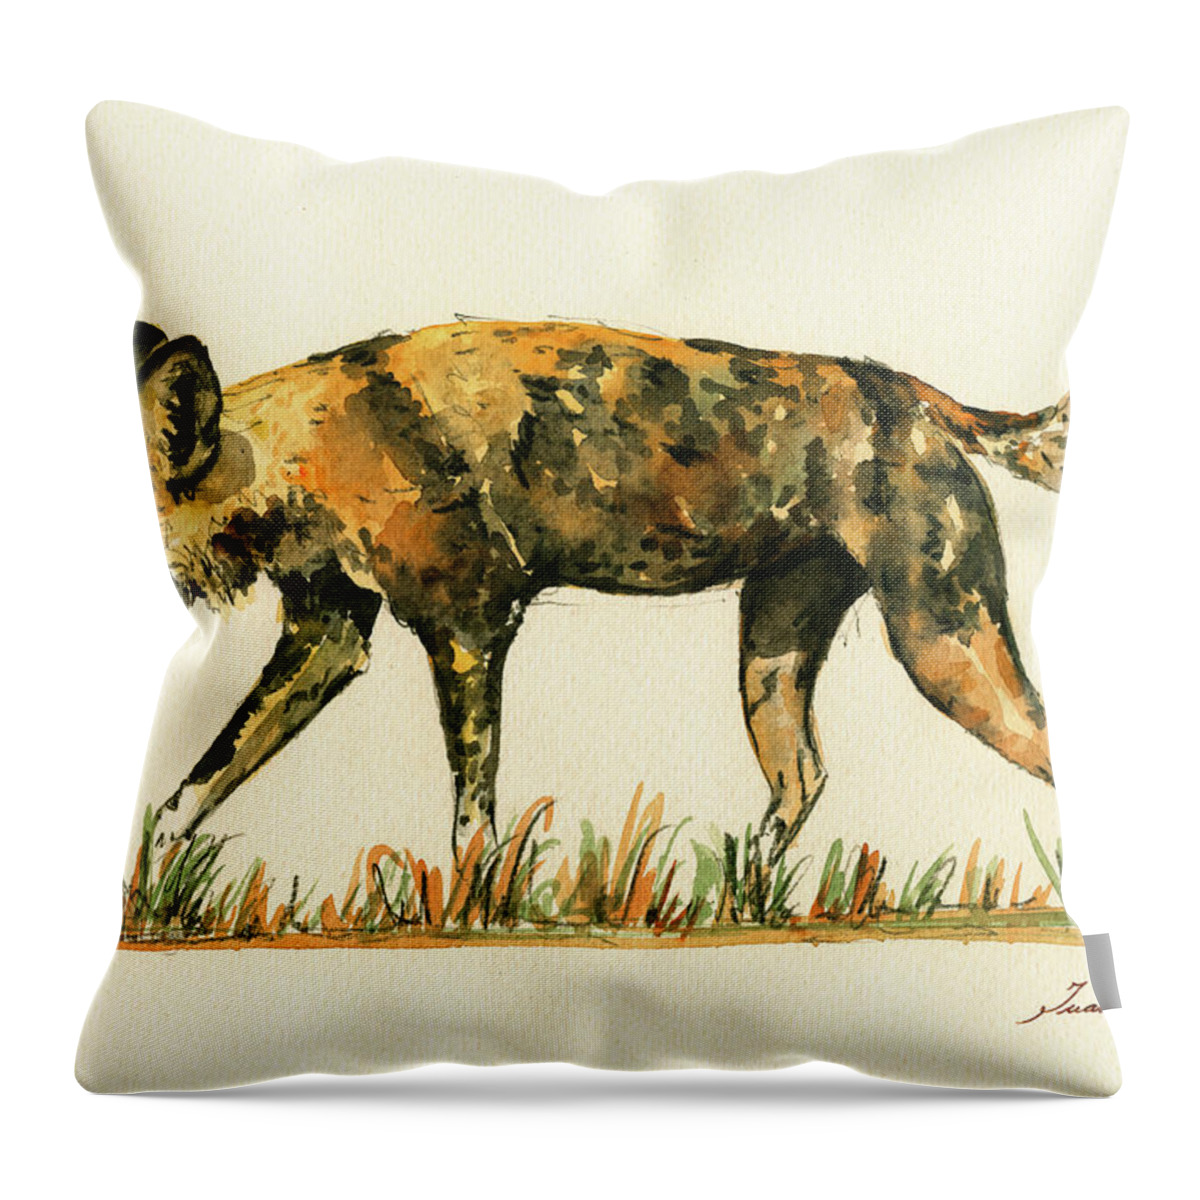 Lycaon Art Wall Throw Pillow featuring the painting Lycaon wild dog by Juan Bosco